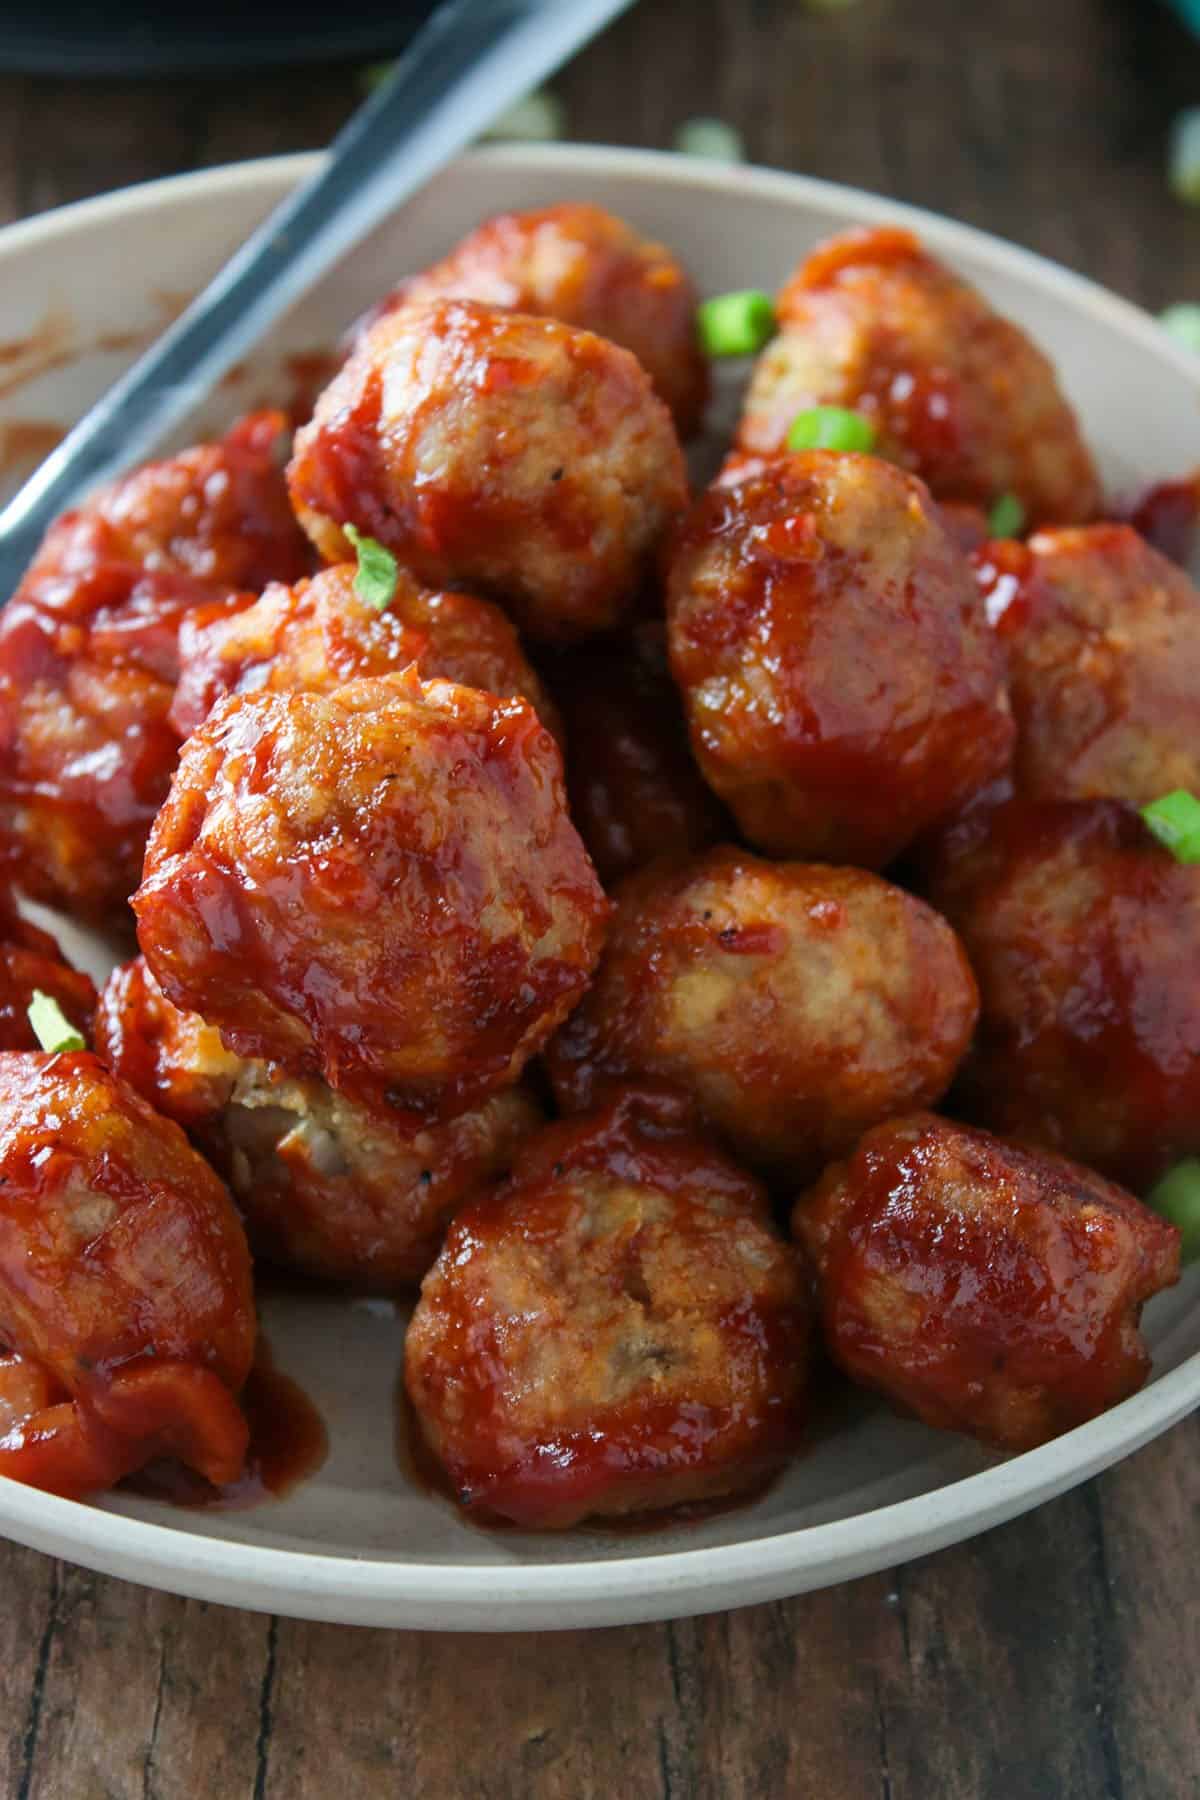 Freshly baked chicken meatballs on a serving plate.